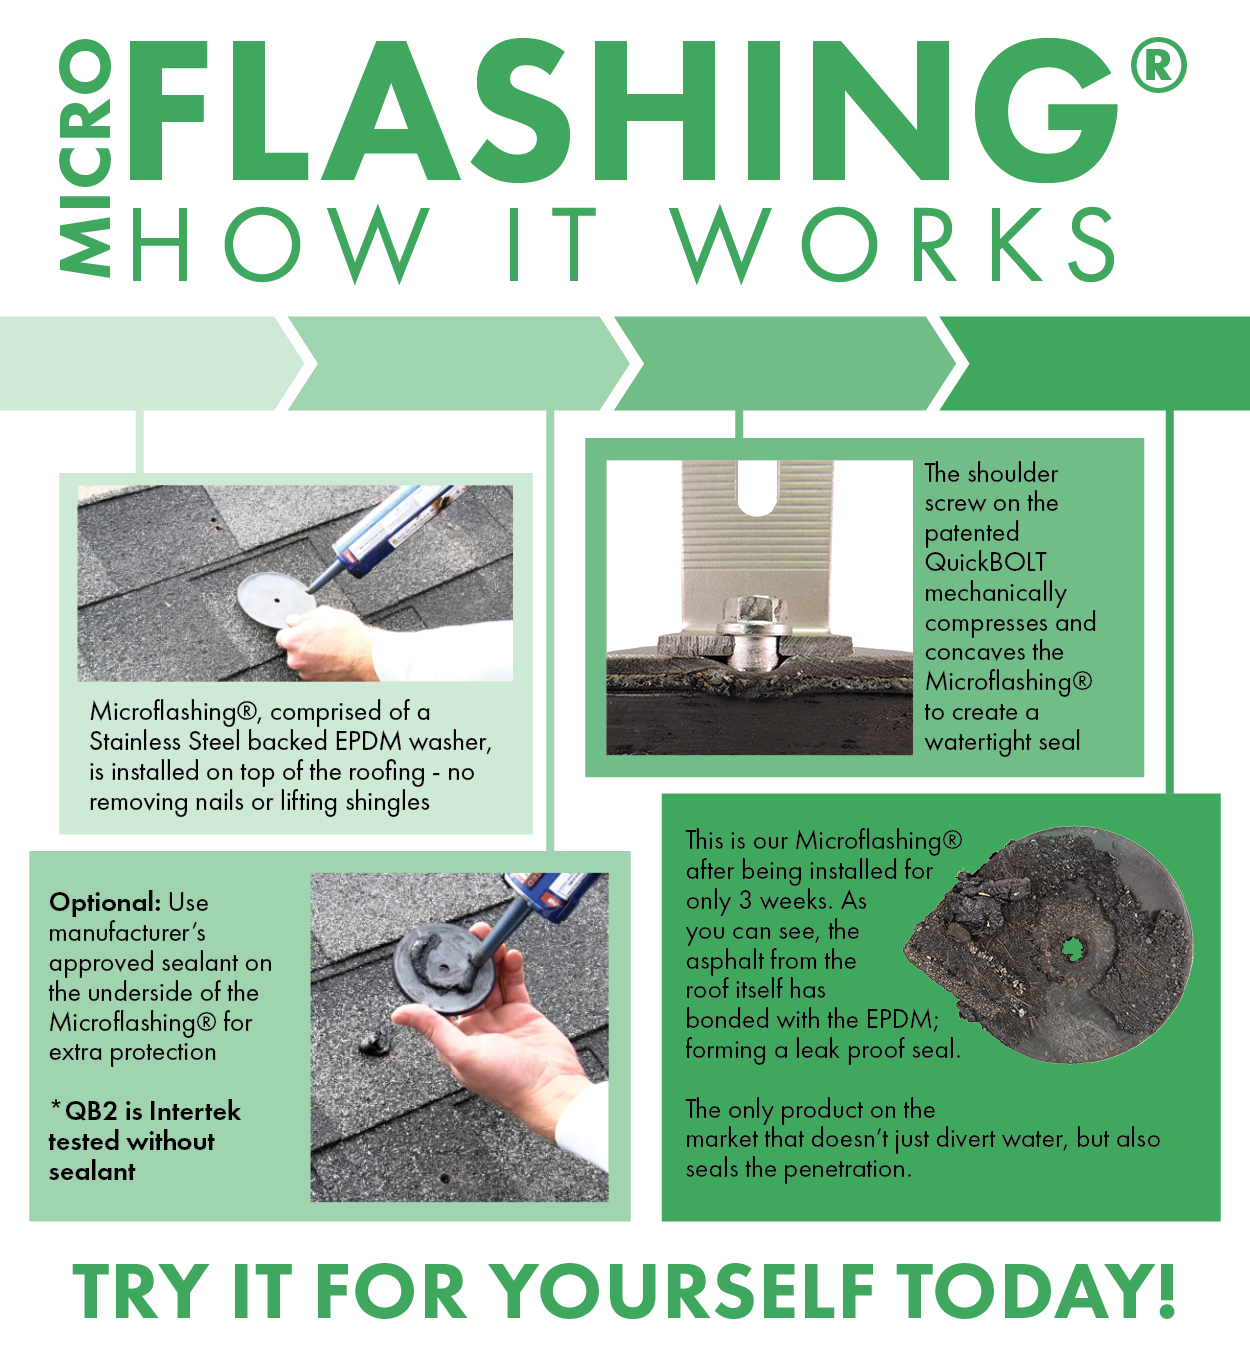 how quickbolt's microflashing works infographic